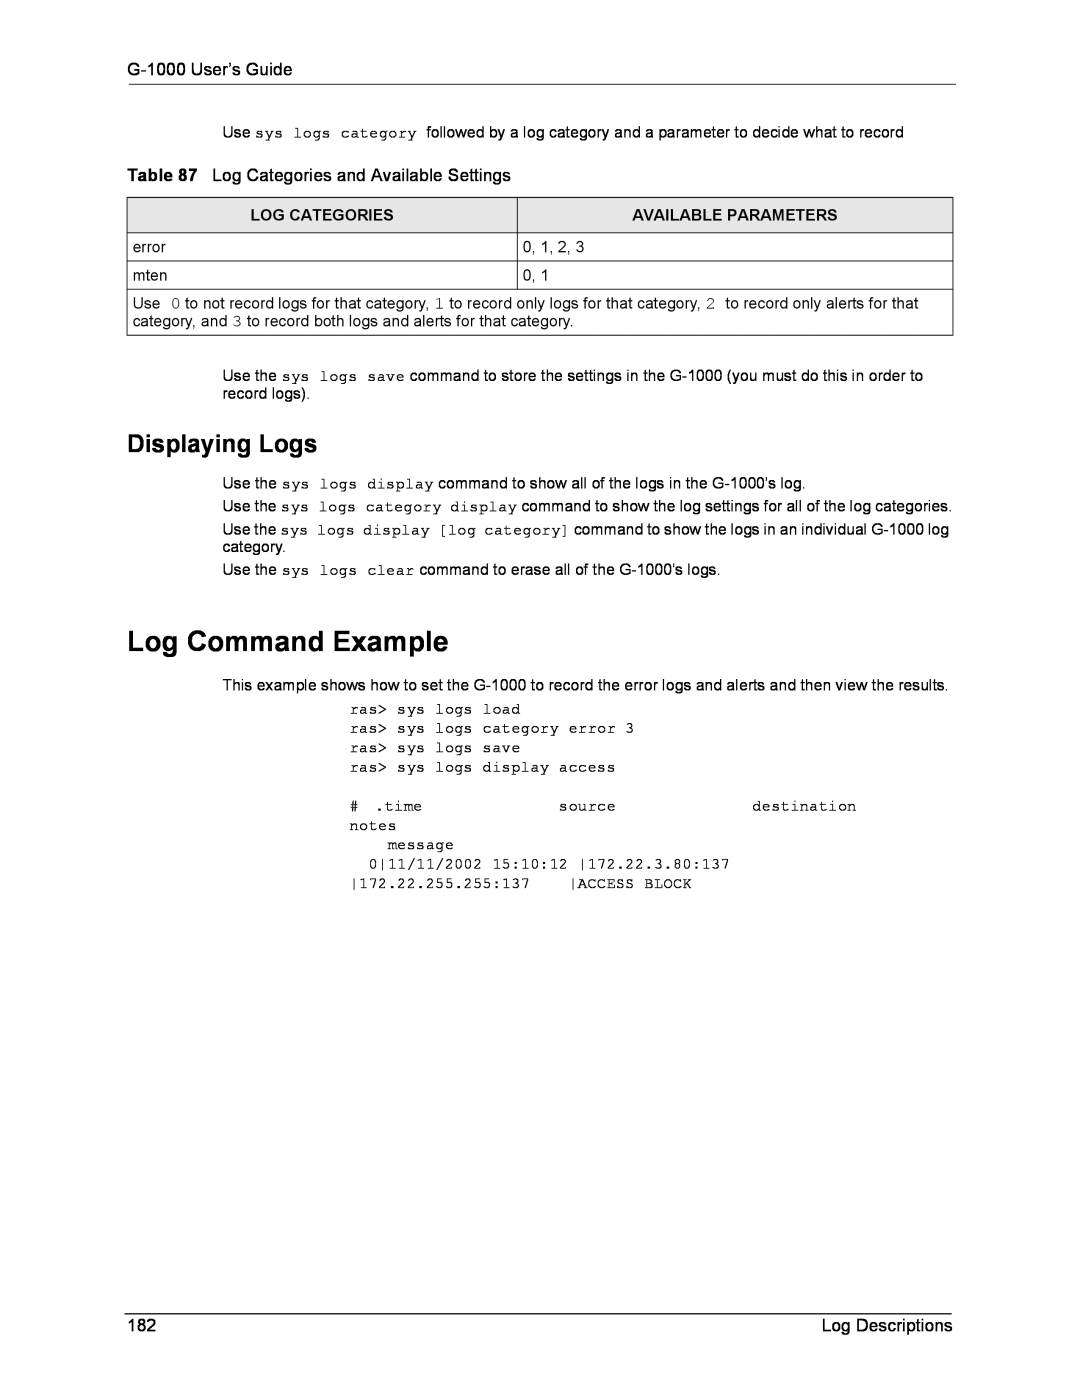 ZyXEL Communications Log Command Example, Displaying Logs, G-1000 User’s Guide, Log Categories and Available Settings 